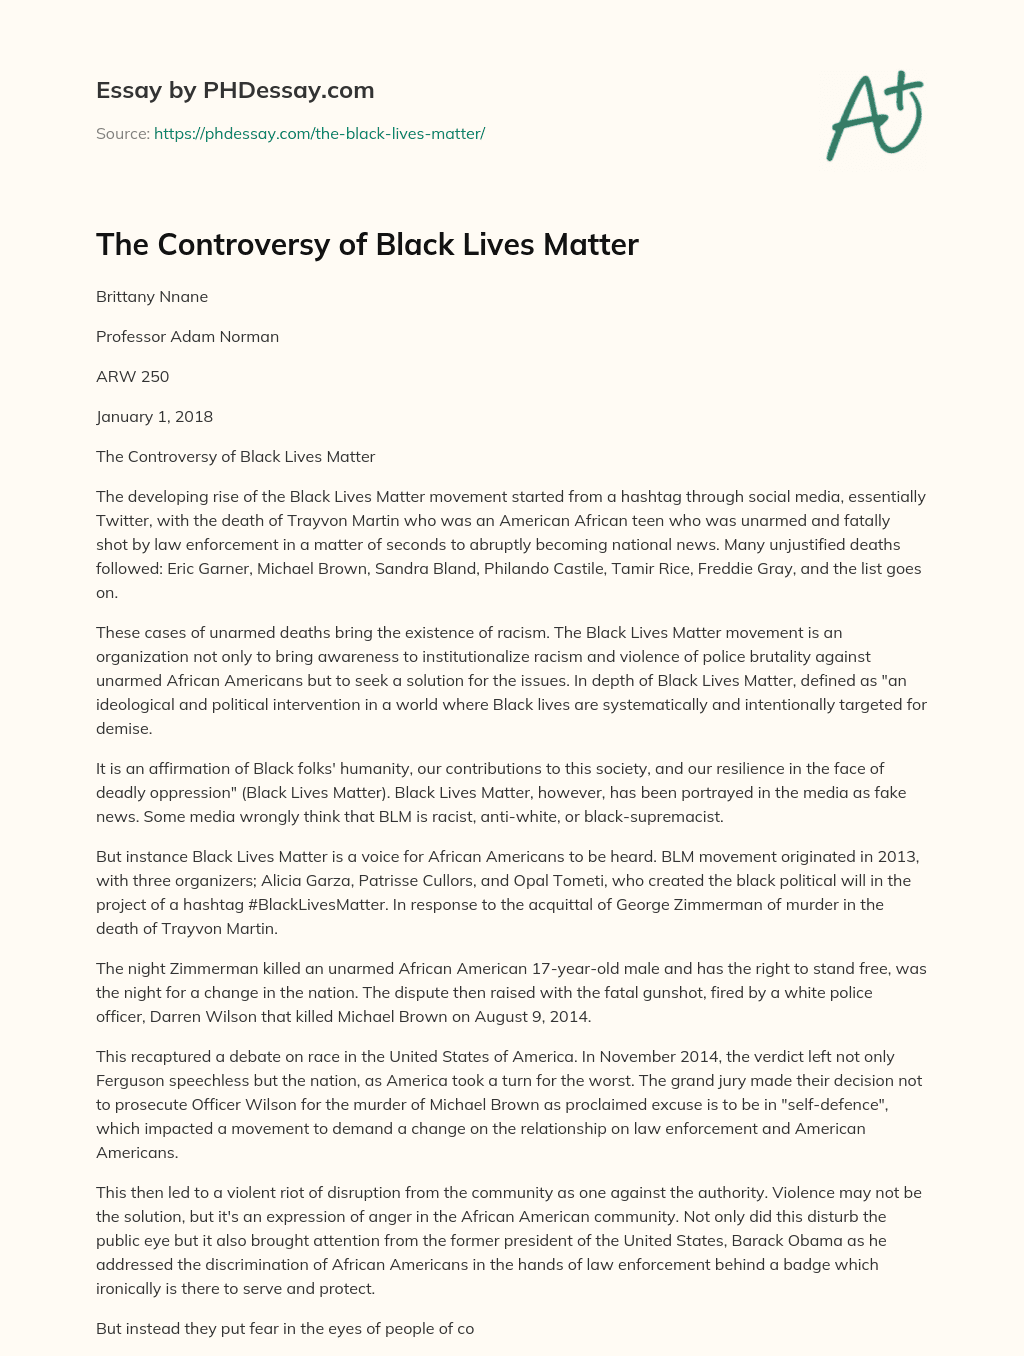 The Controversy of Black Lives Matter essay